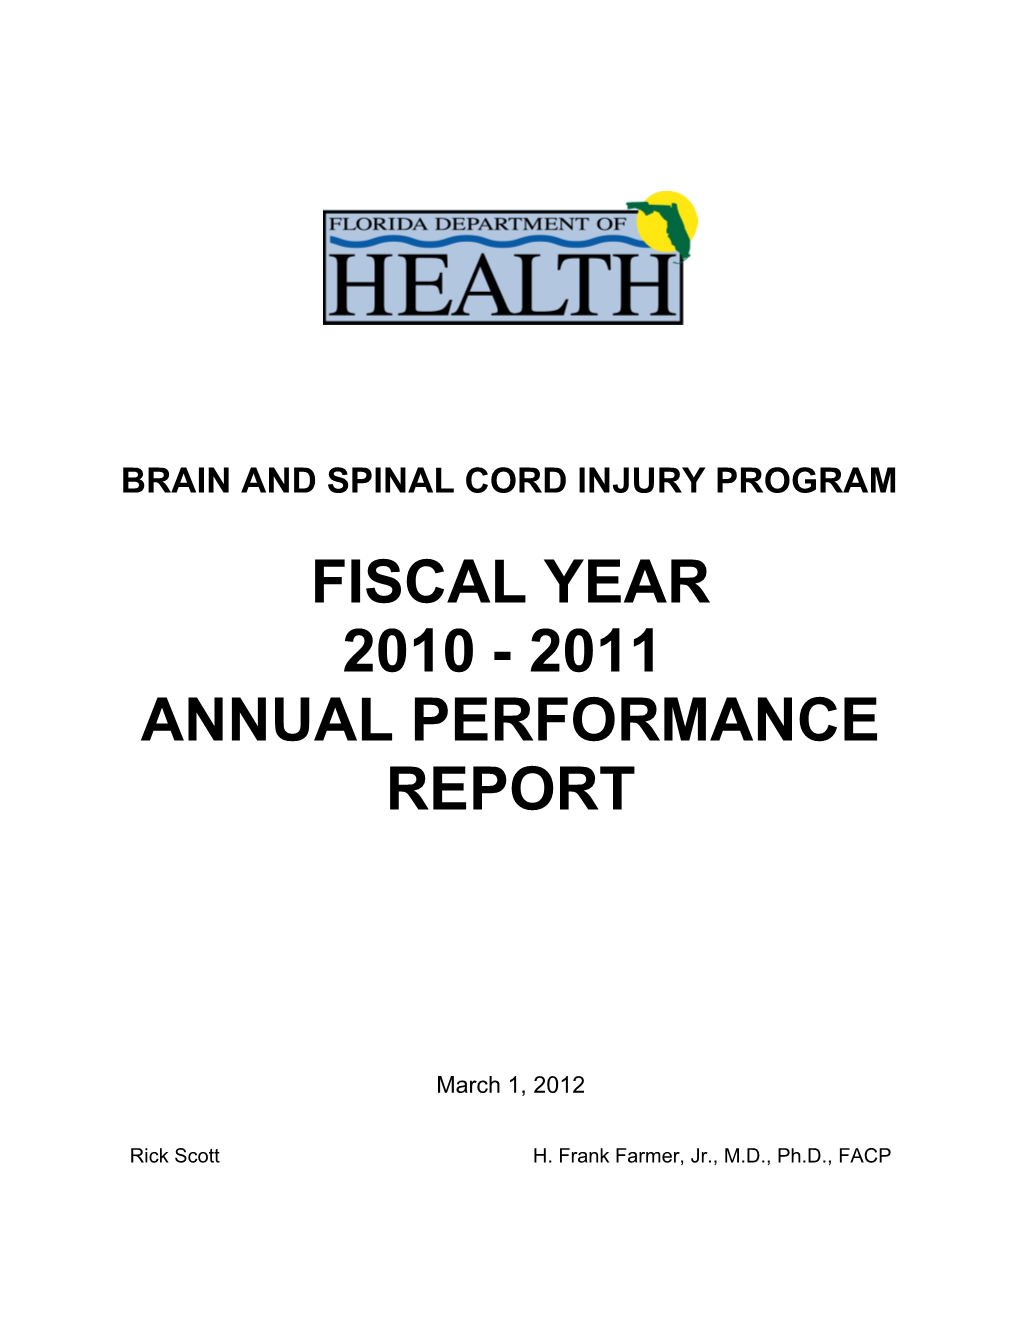 Brain and Spinal Cord Injury Program